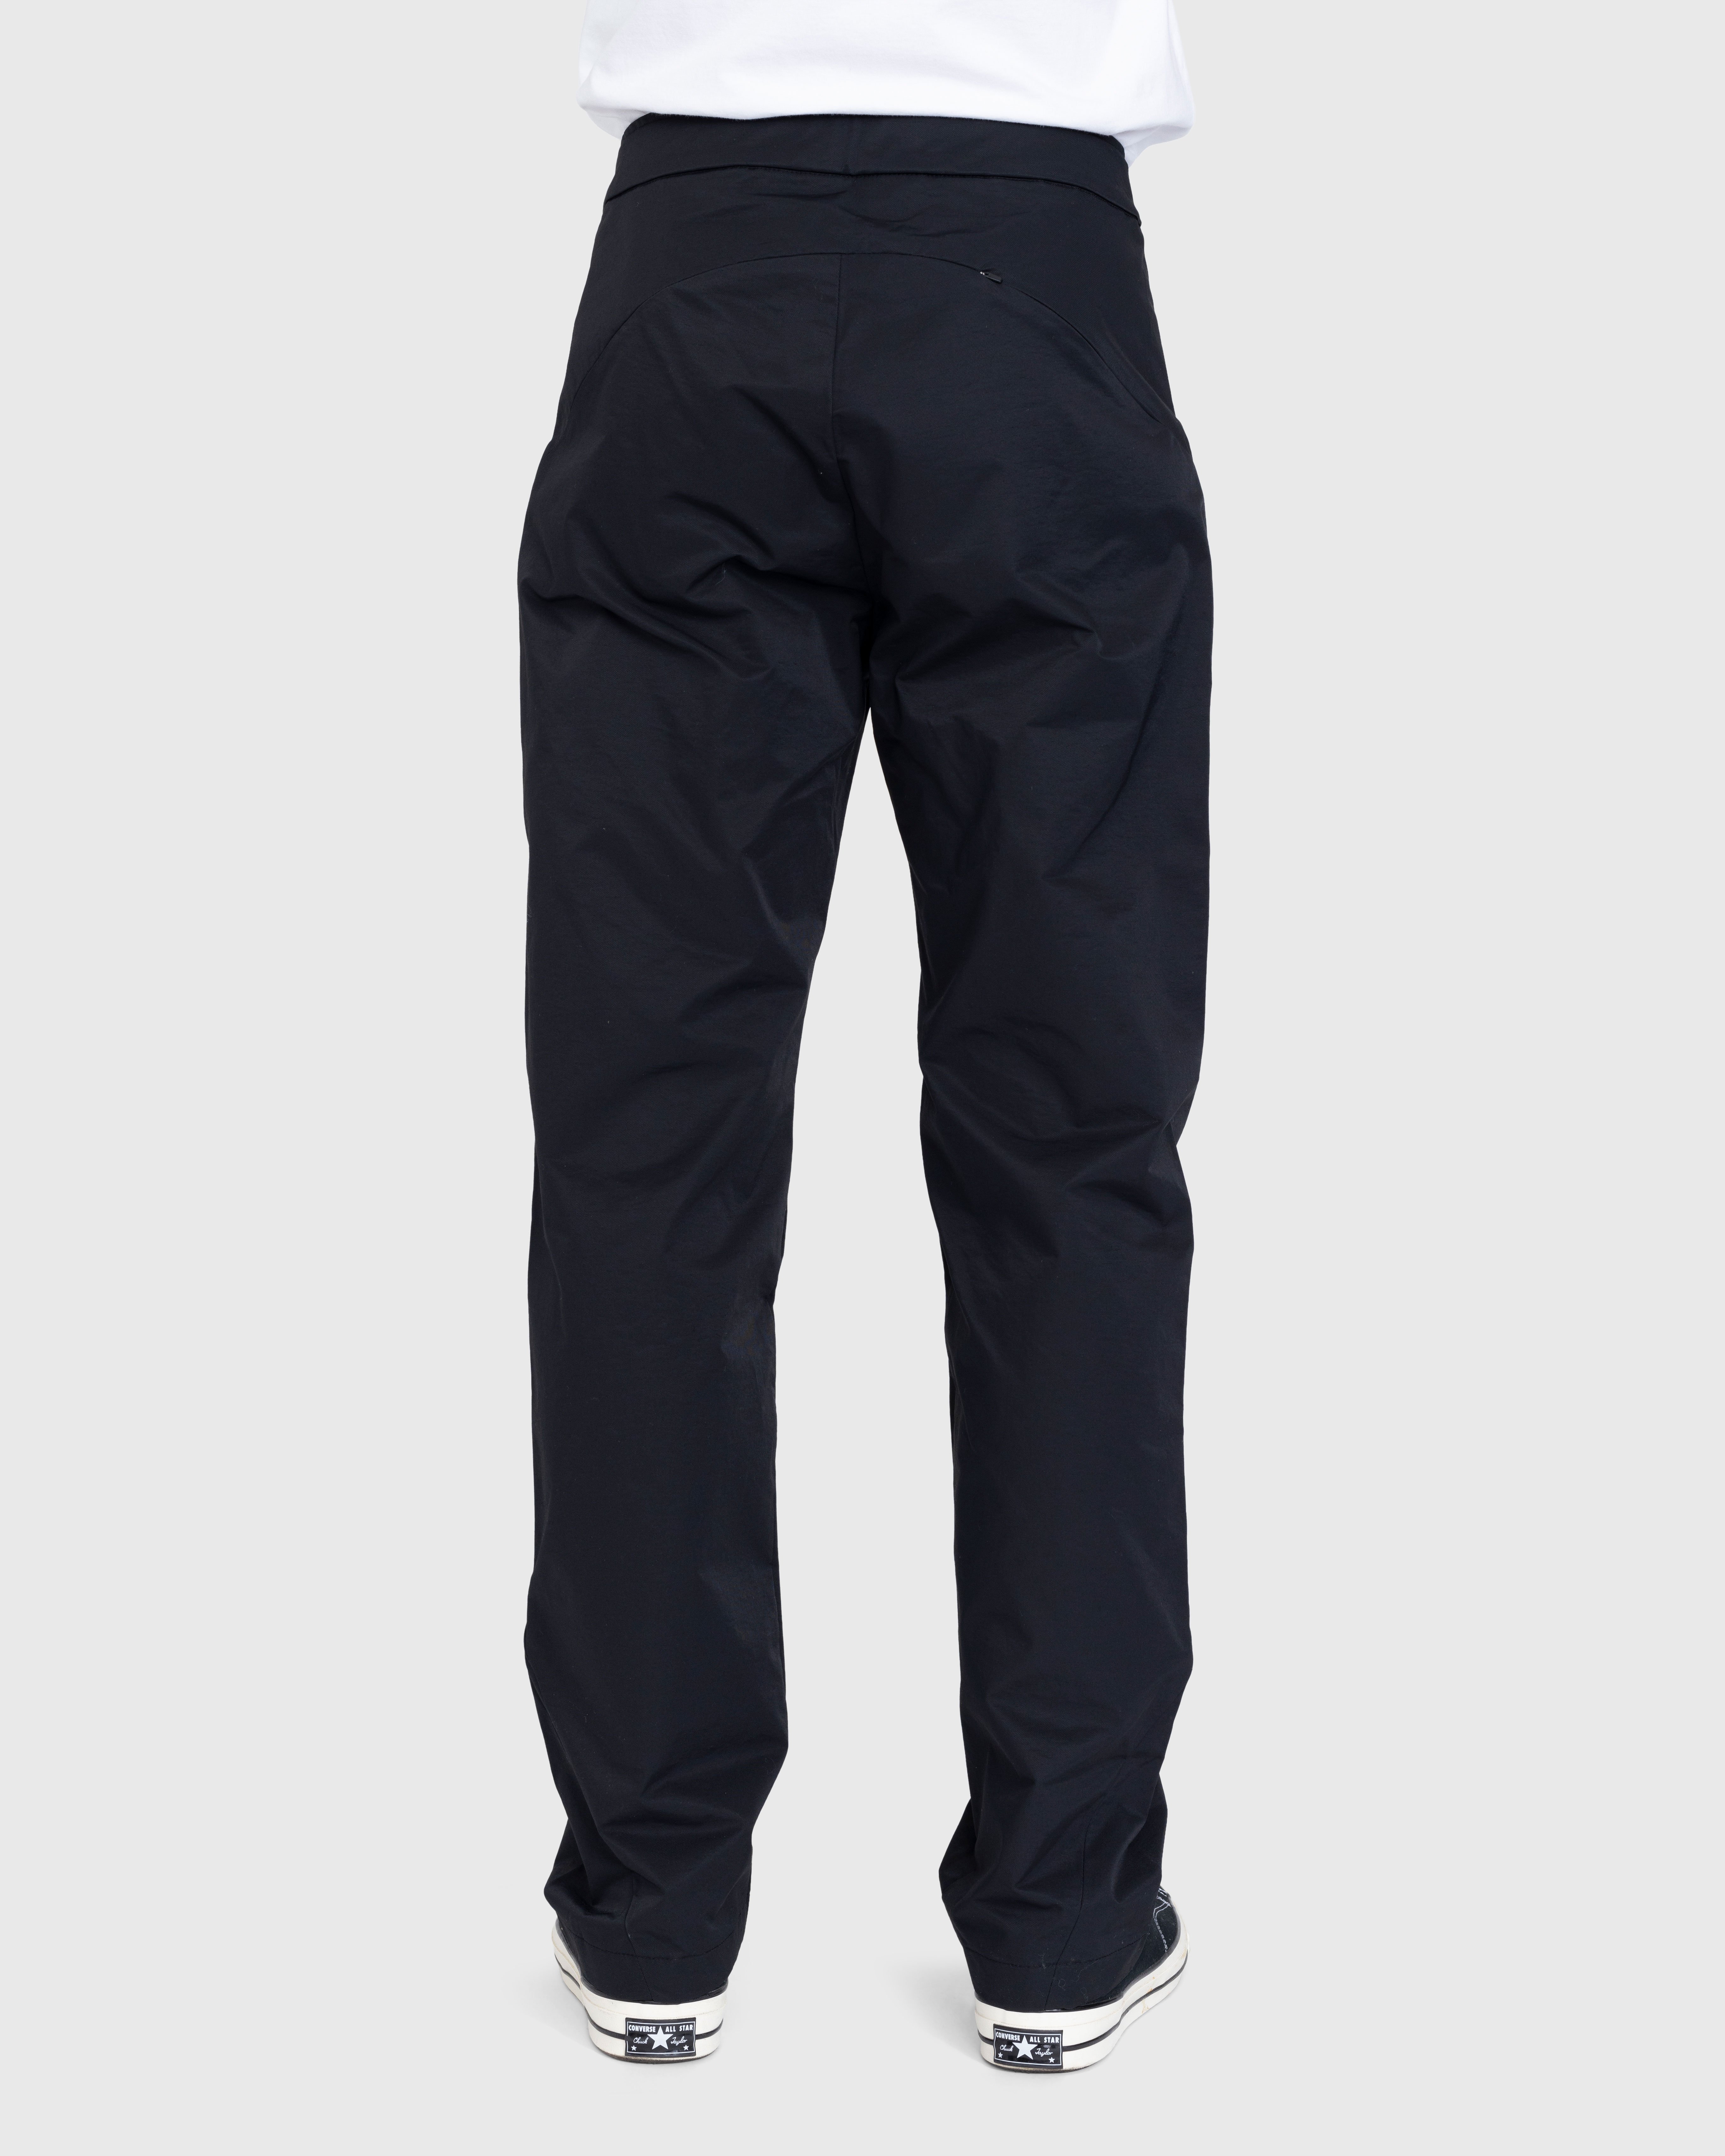 Post Archive Faction (PAF) - 5.0 Technical Trousers Right Black - Clothing - Black - Image 4